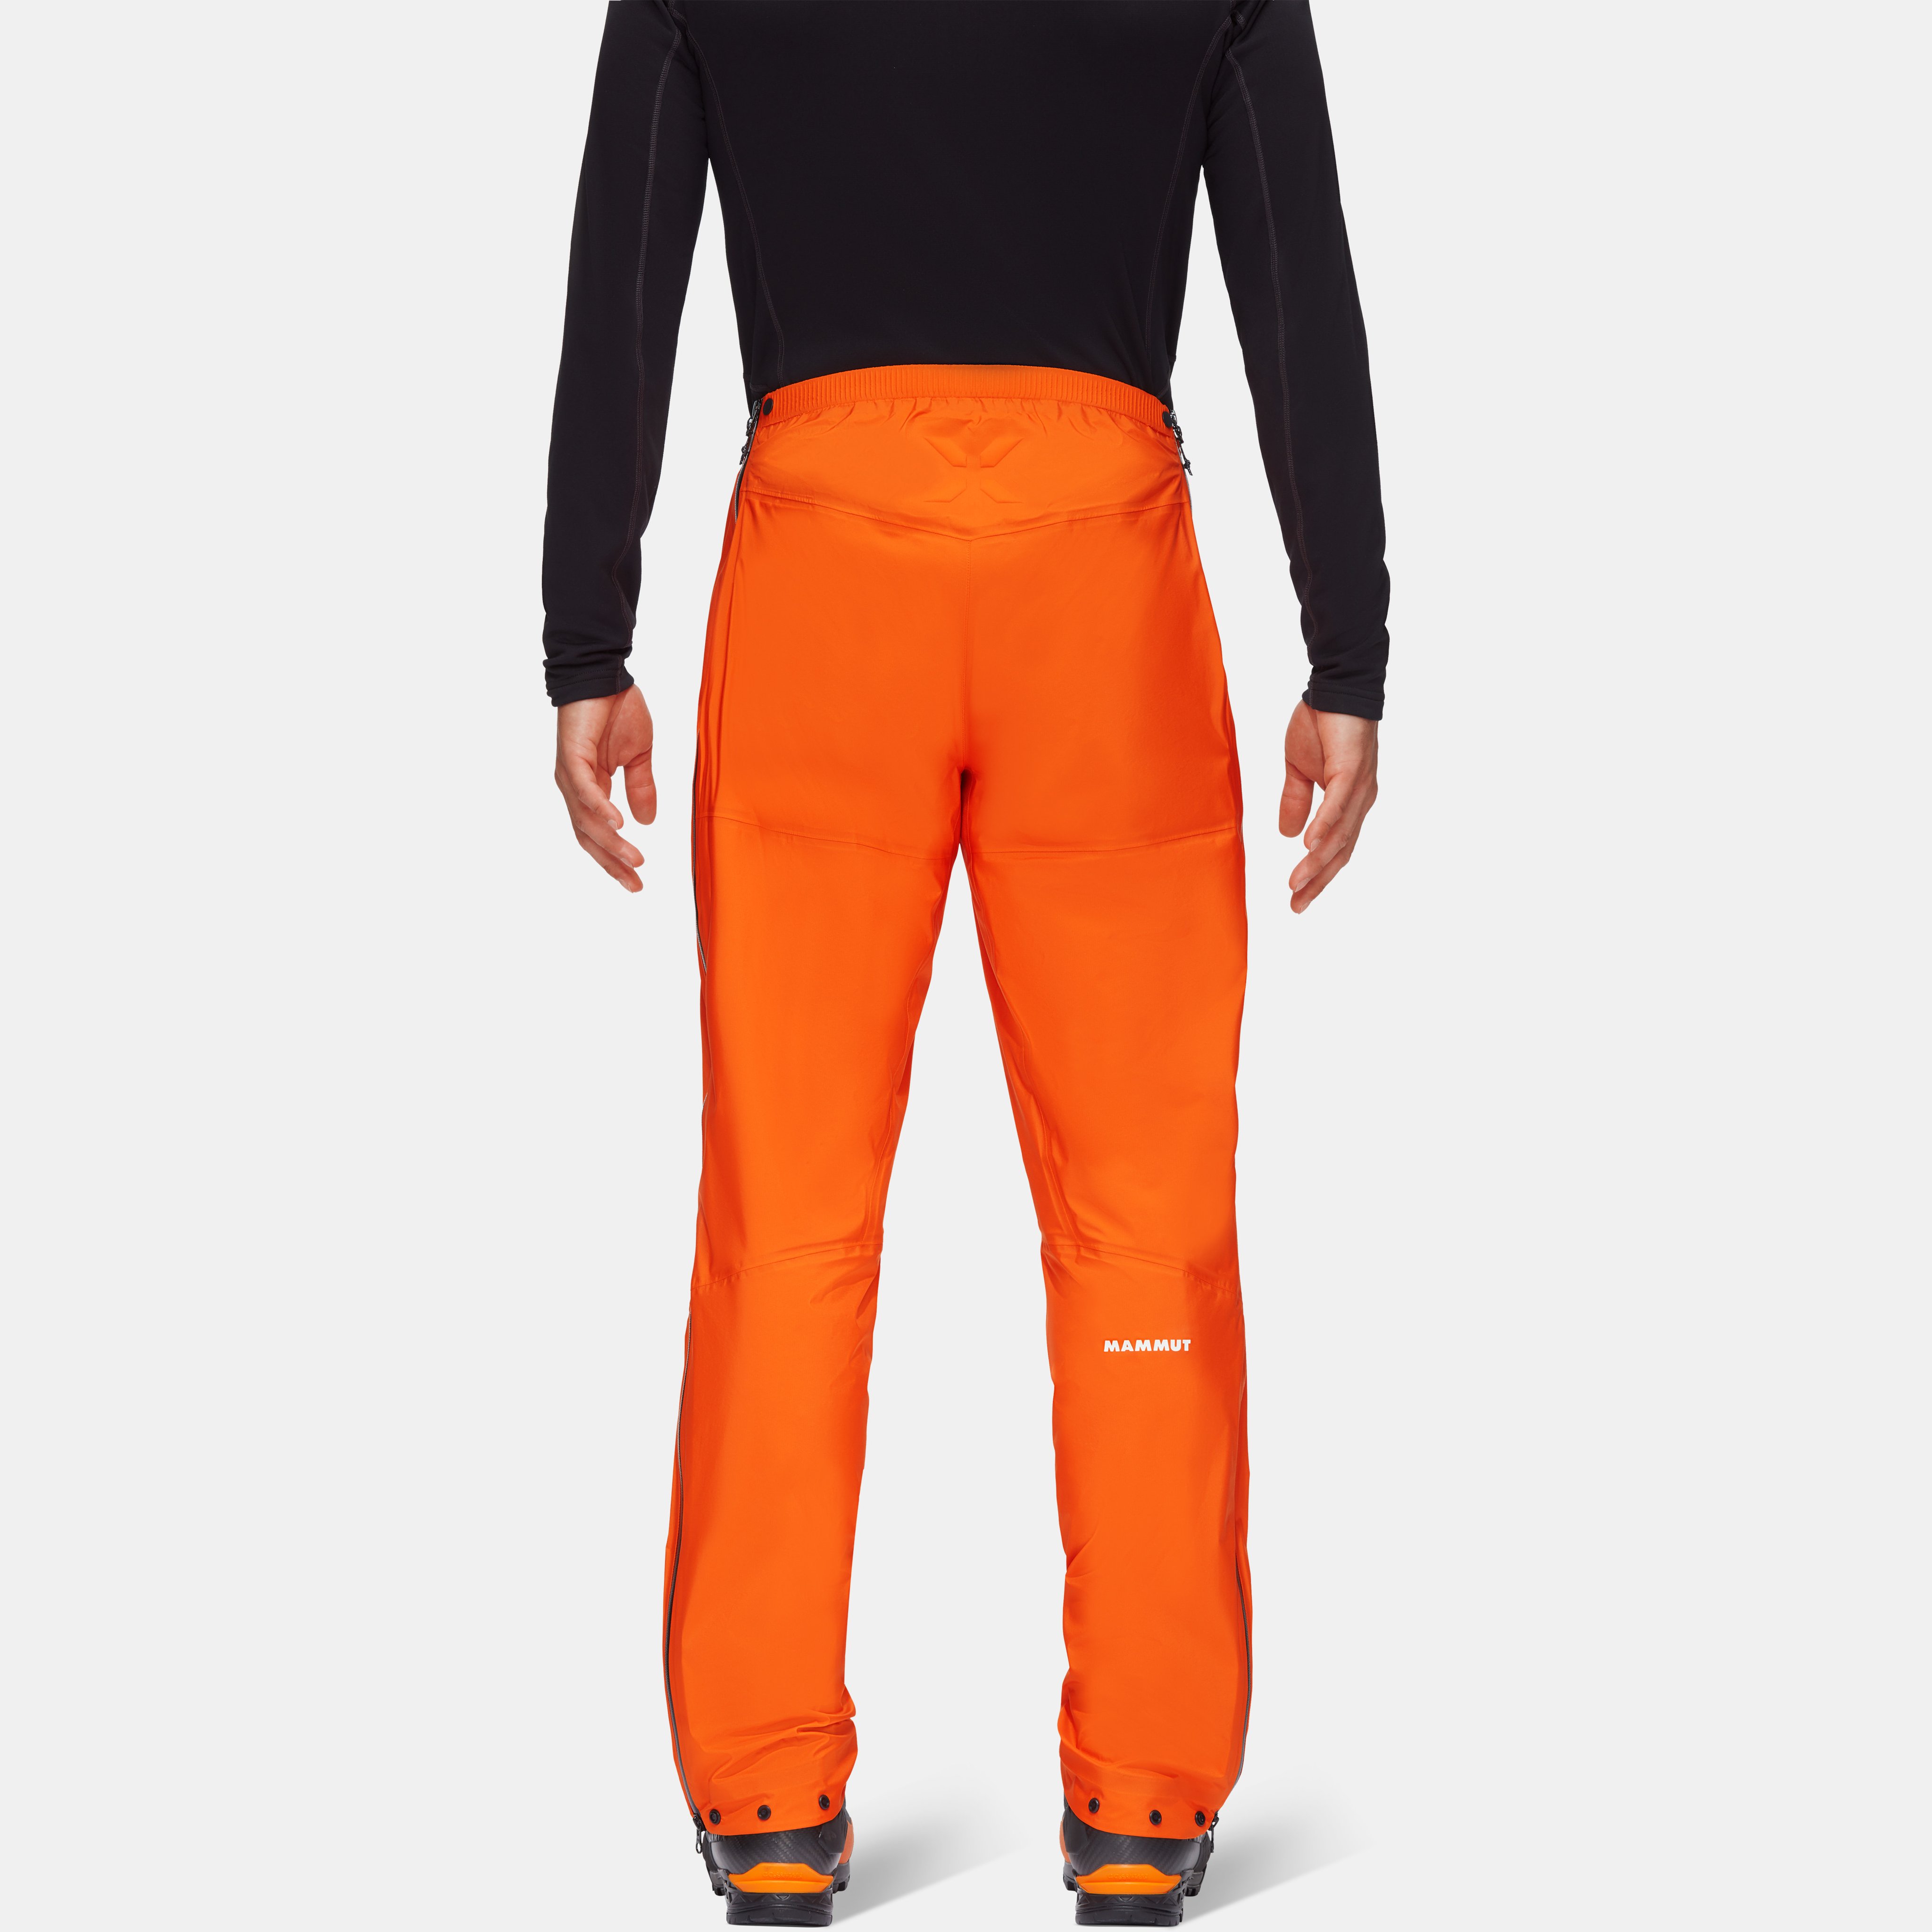 Nordwand Light HS Pants product image